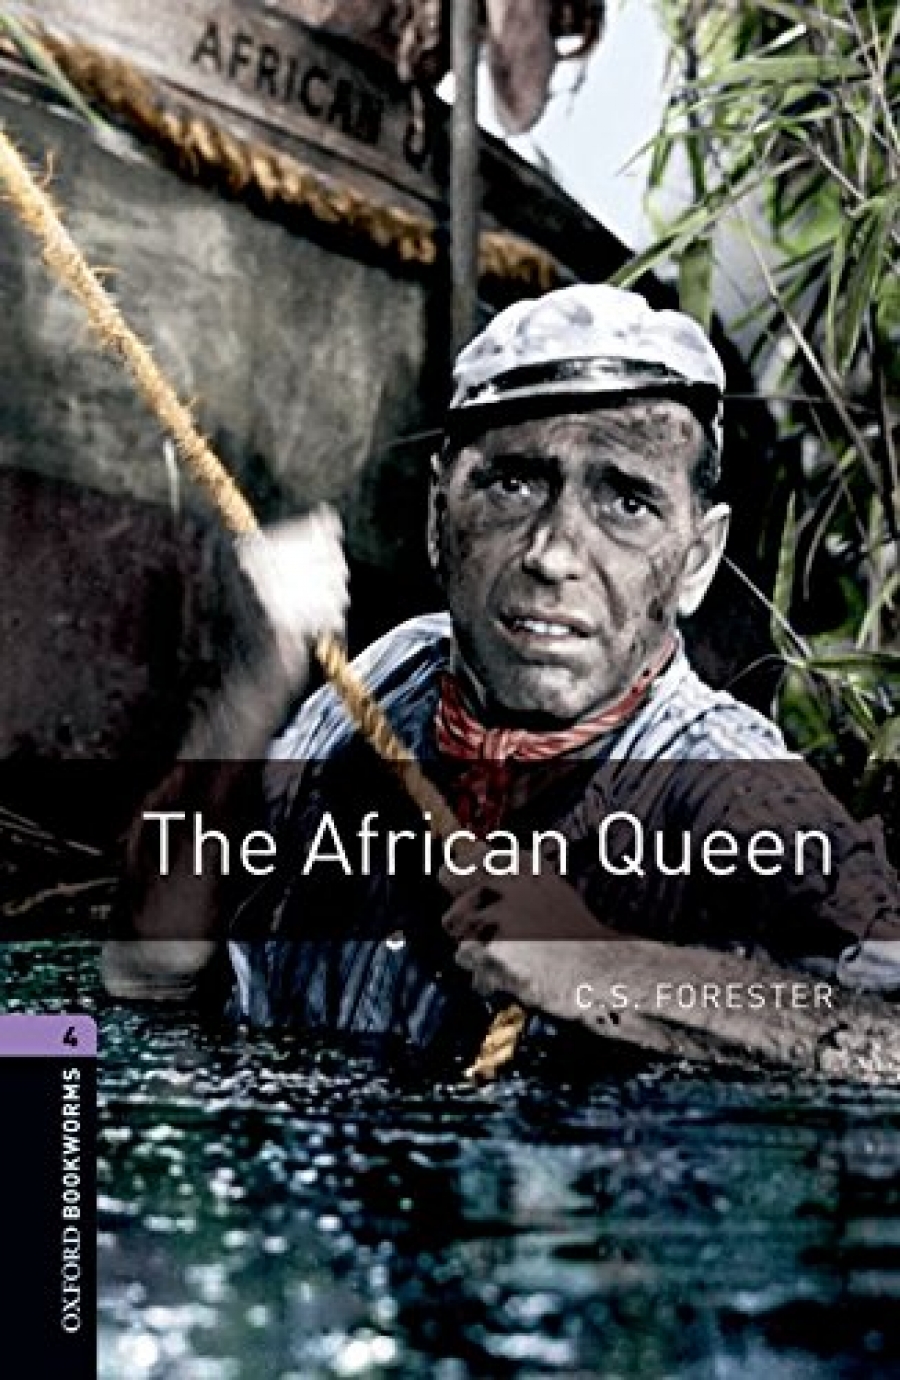 C.S. Forester Retold by Clare West OBL 4: The African Queen 